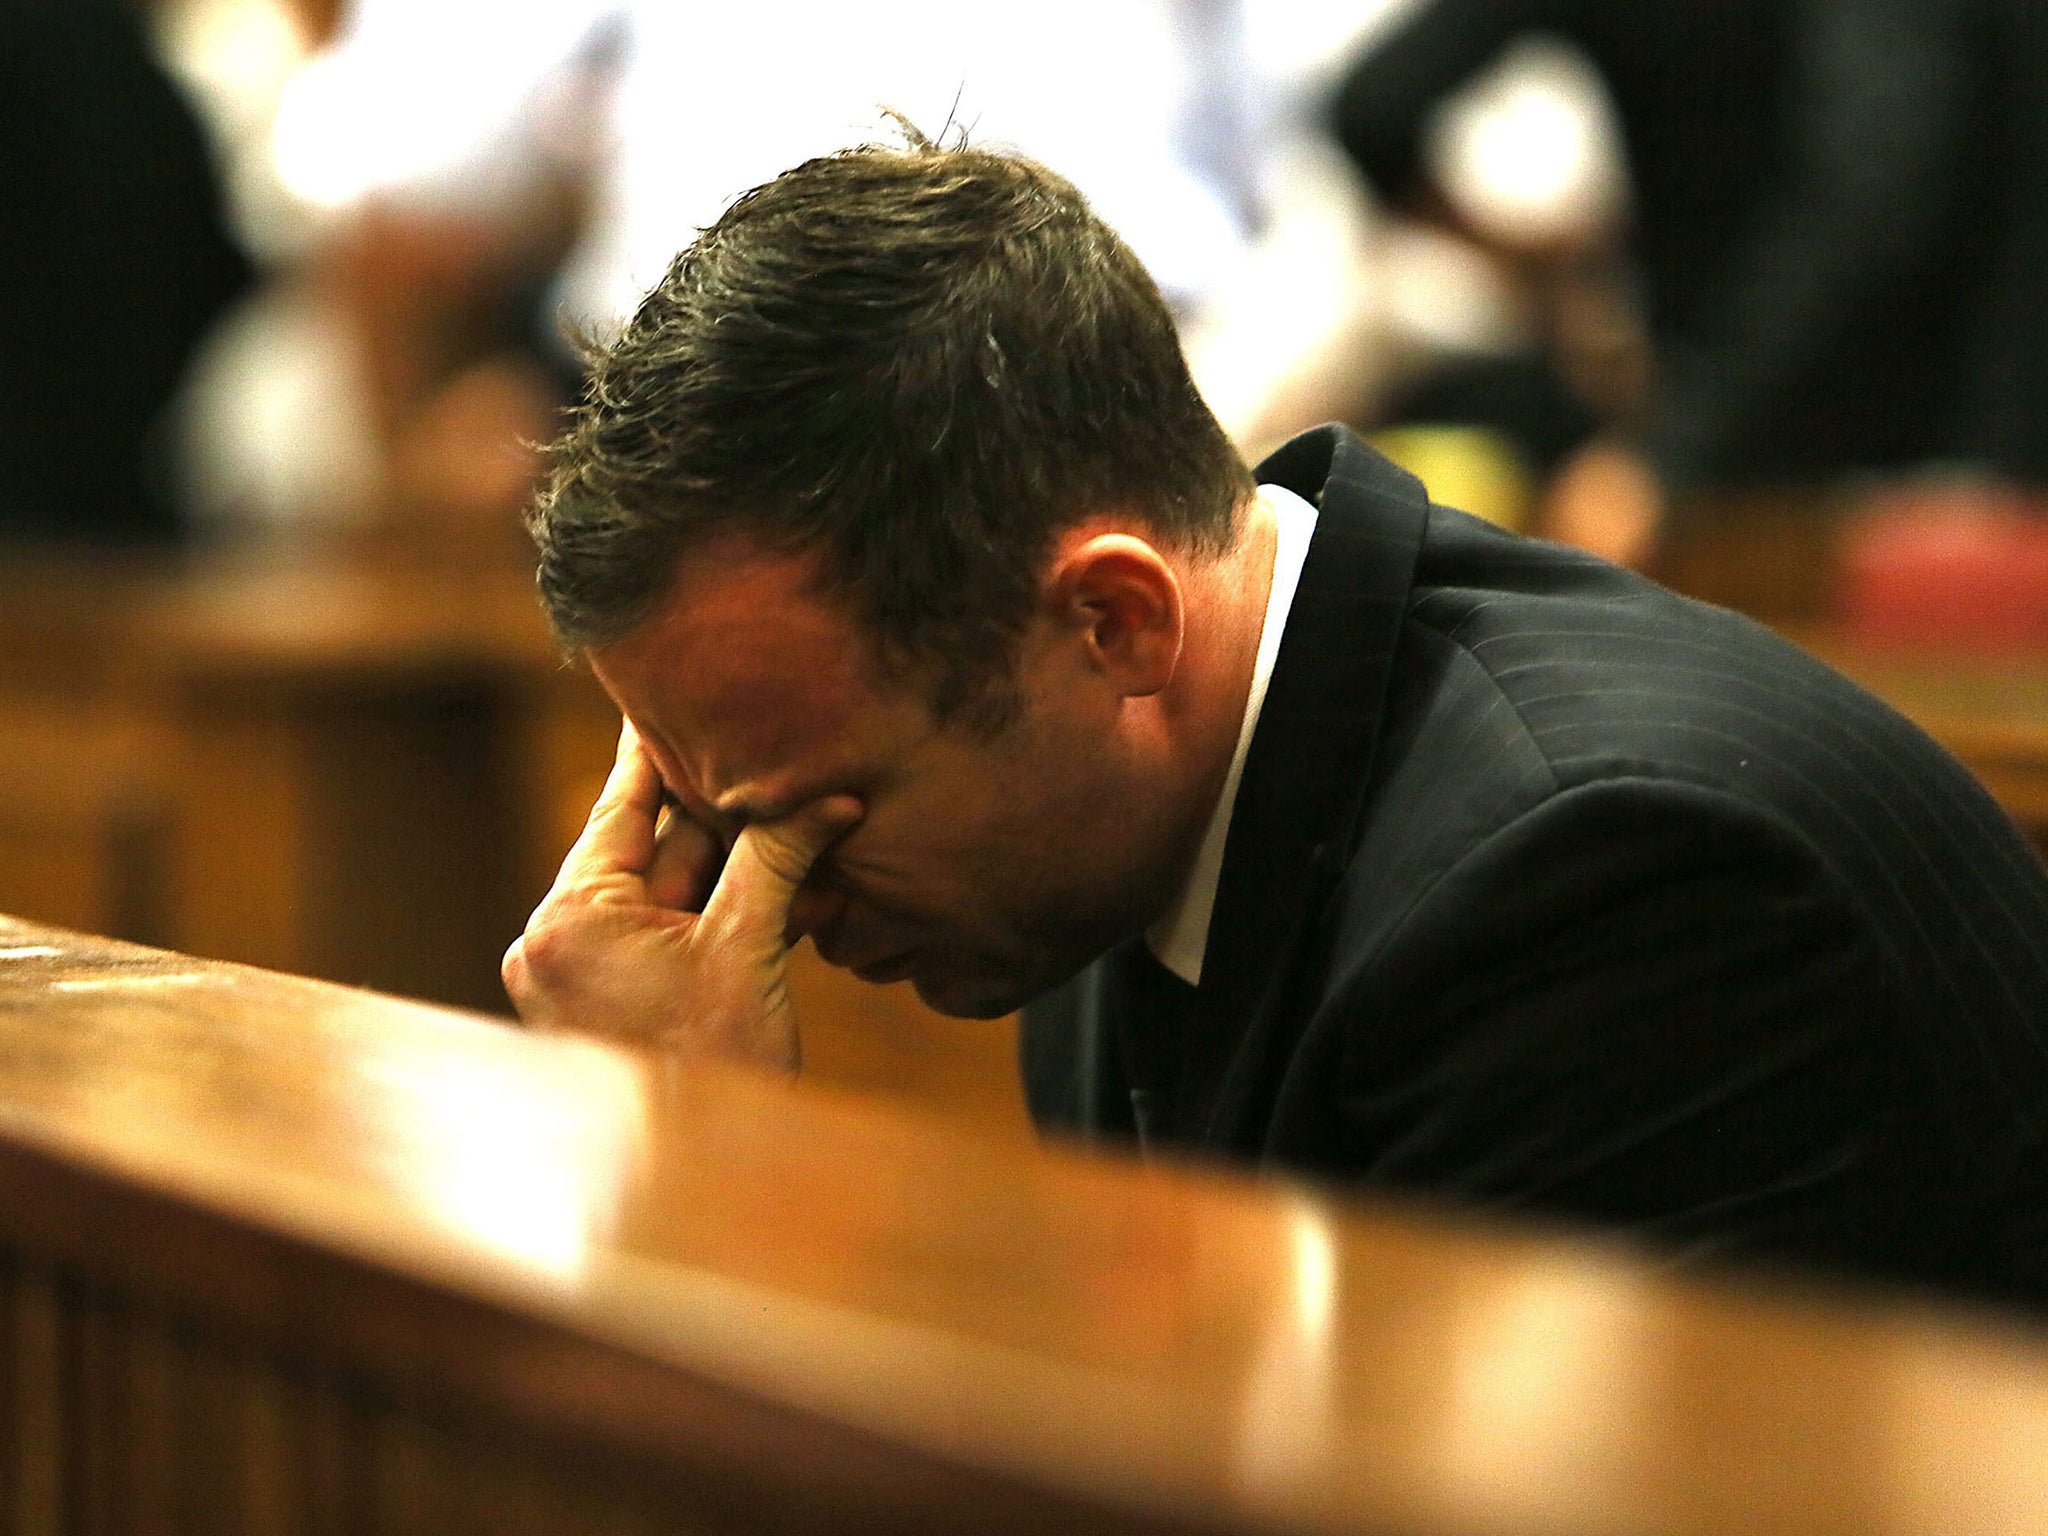 Oscar Pistorius reacts to the verdict in his murder trial at the High Court in Pretoria